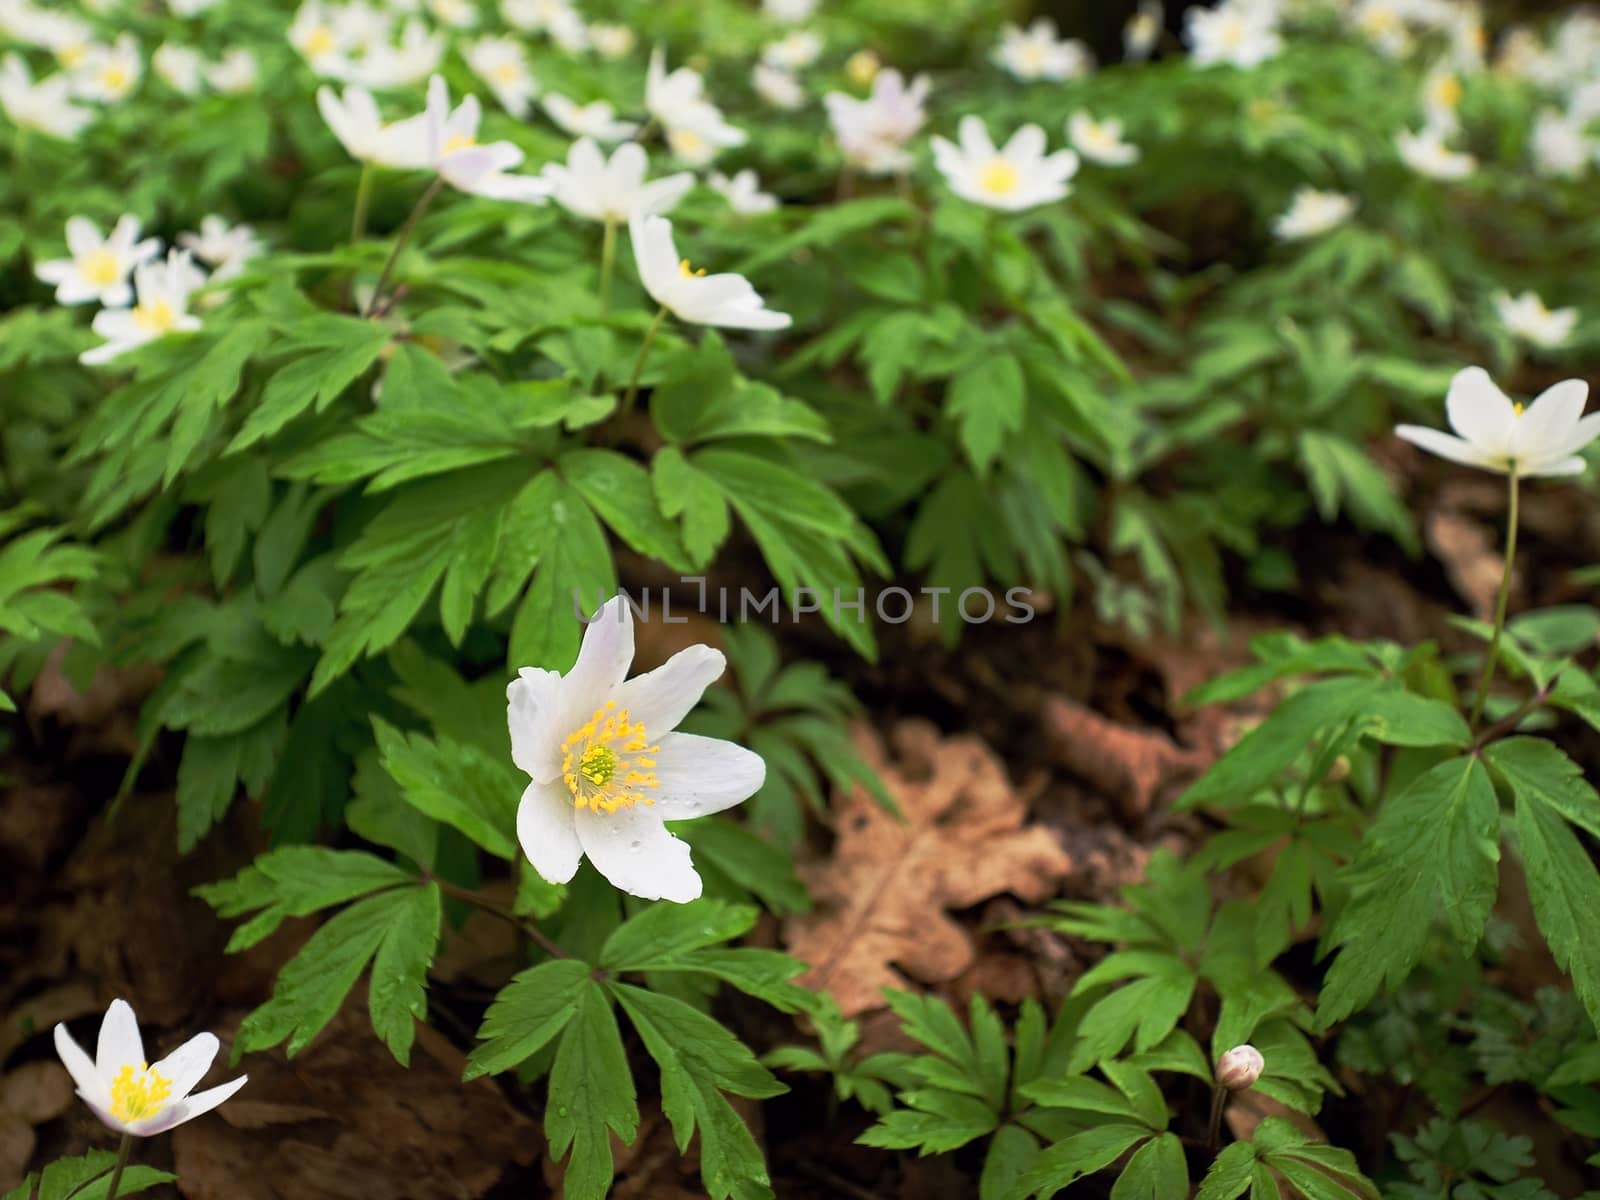 Meadow full of wood anemones in blossom, view close up to ground. Flowering anemone nemorosa by rdonar2